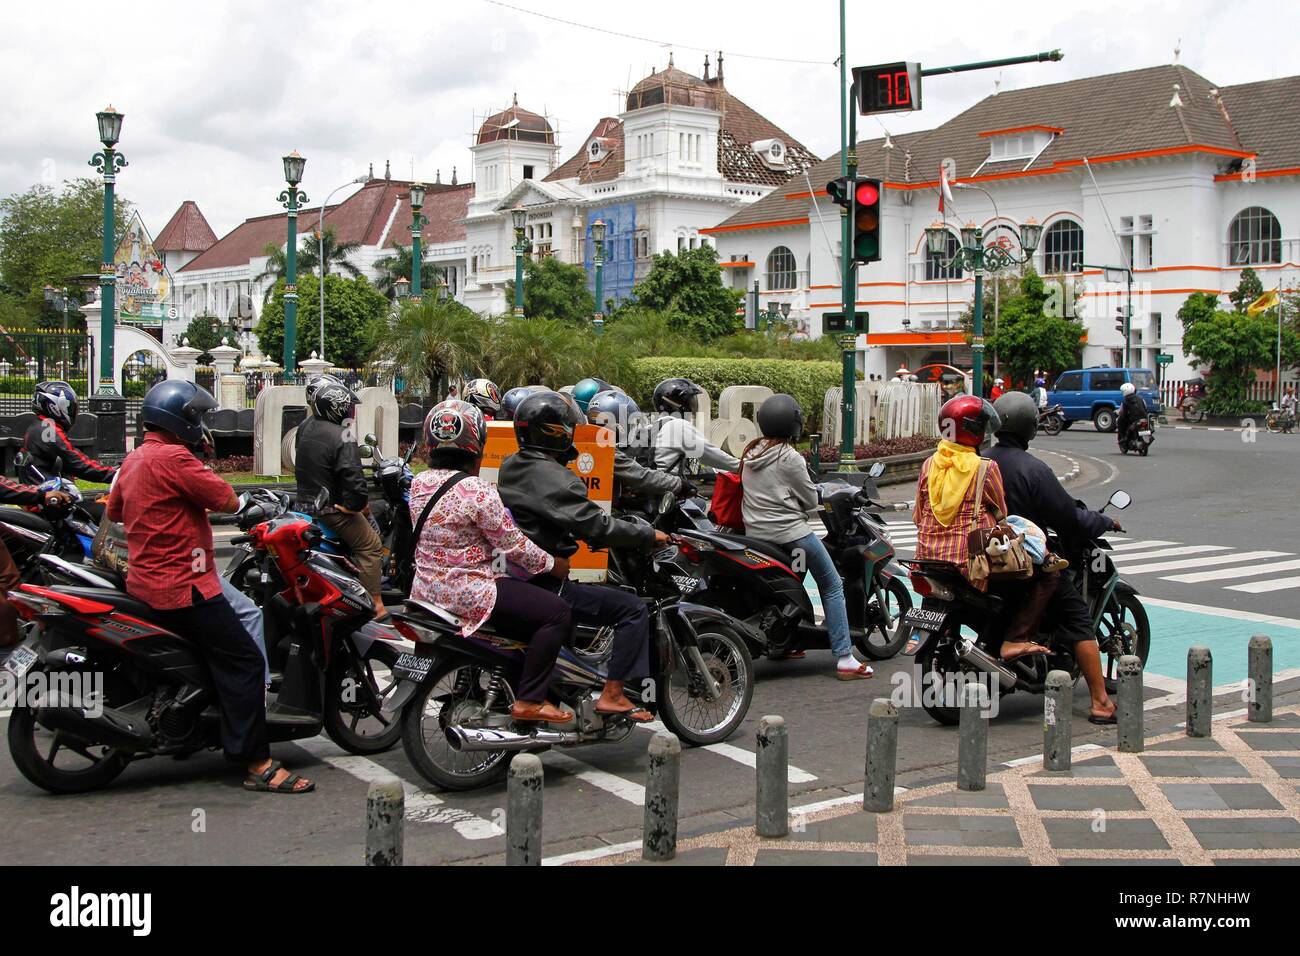 Indonesia, Java, Yogyakarta, Motocyclists at a red light in front of Dutch colonial buildings Stock Photo